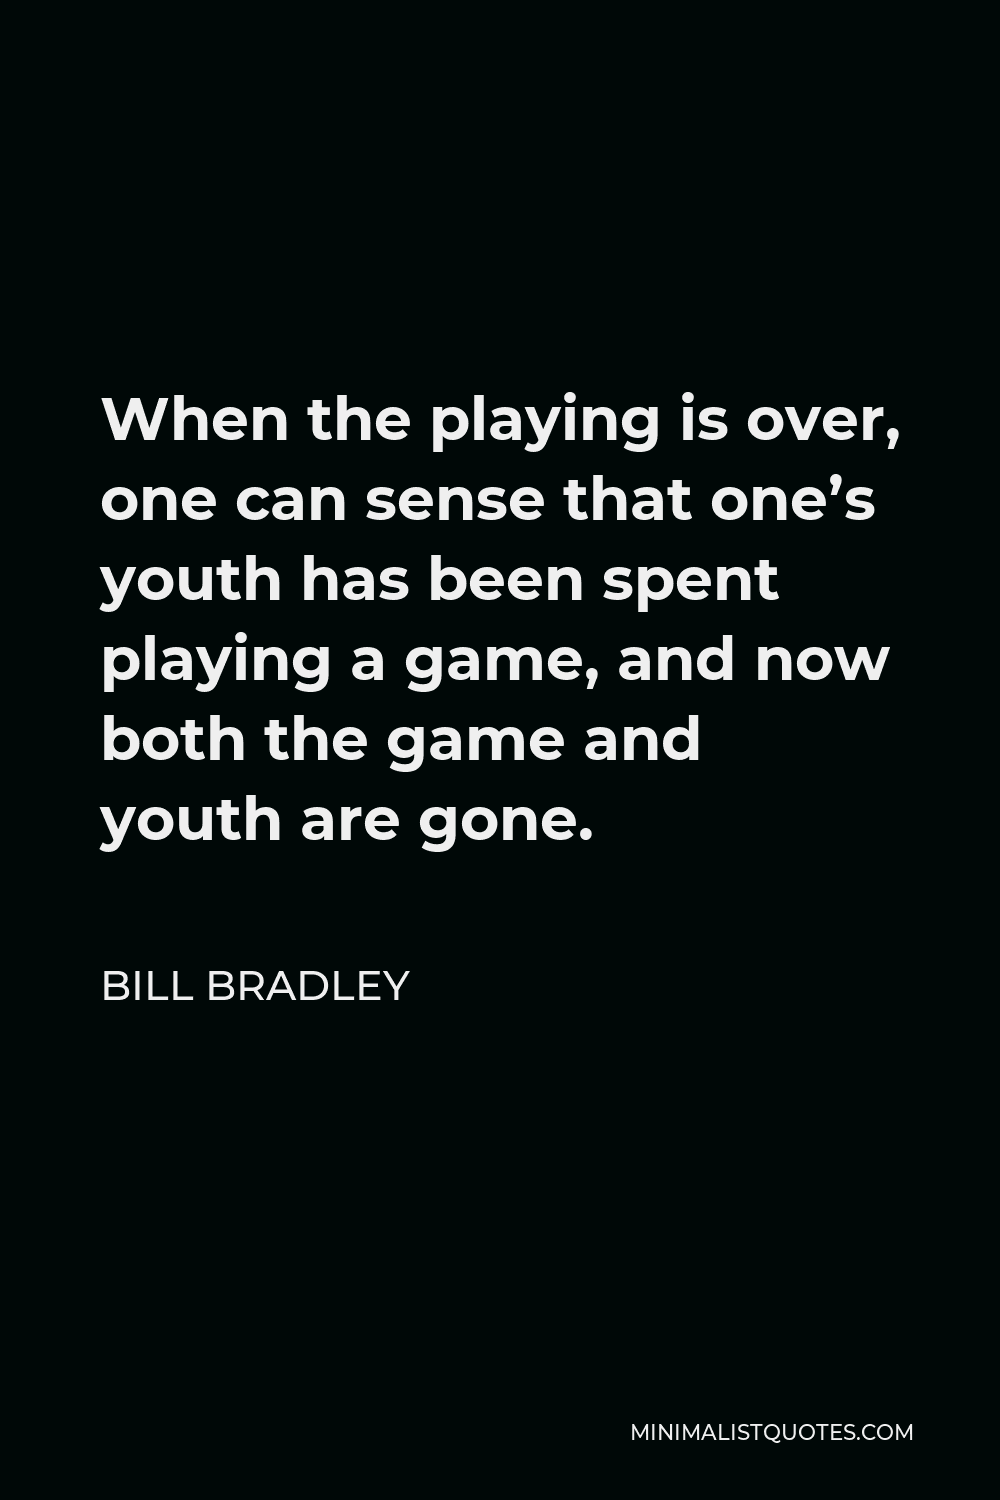 Bill Bradley Quote - When the playing is over, one can sense that one’s youth has been spent playing a game, and now both the game and youth are gone.